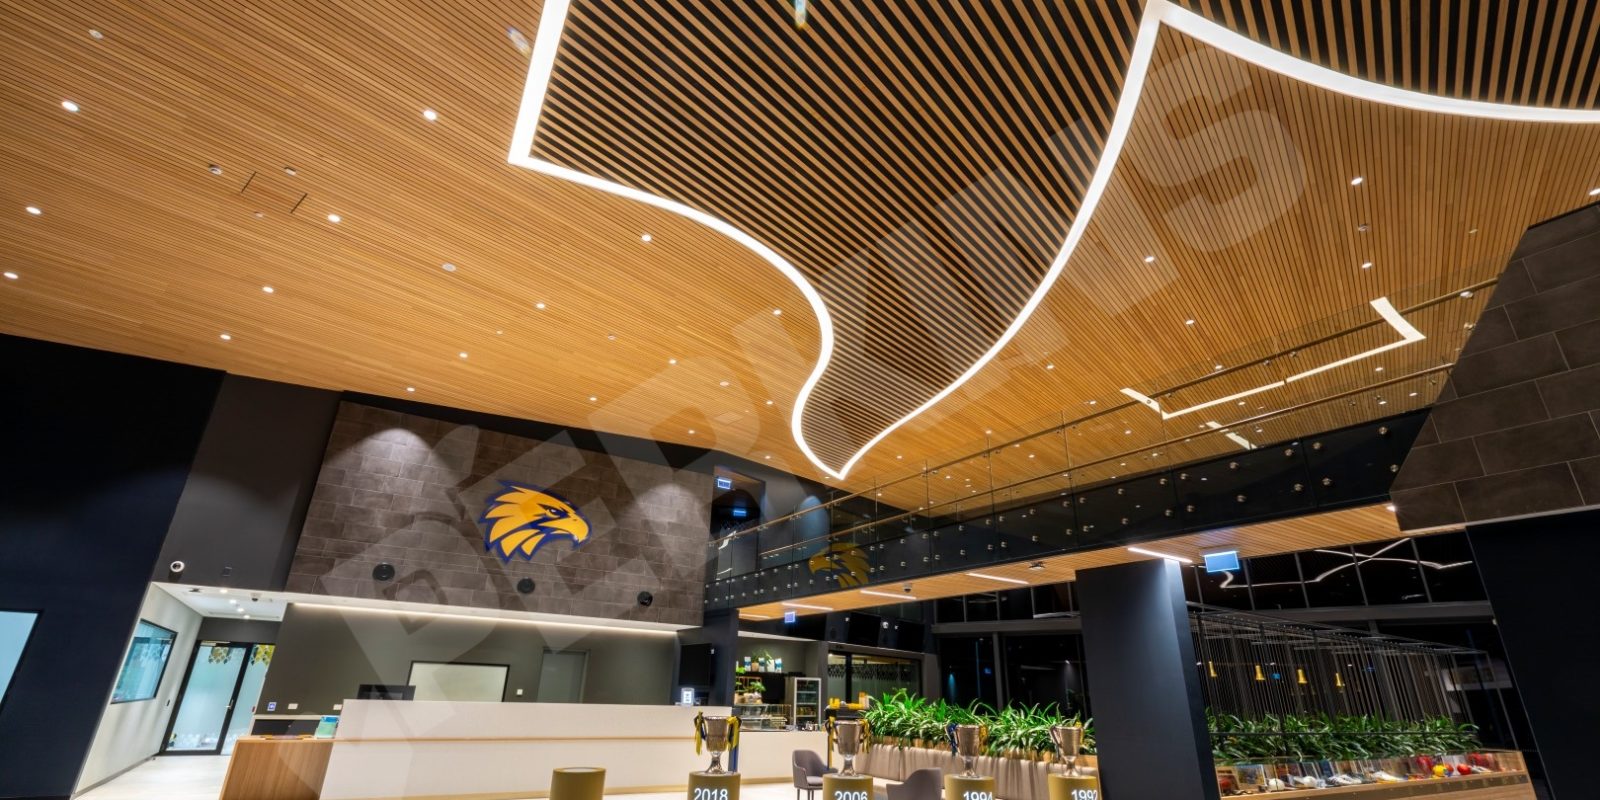 West Coast Eagles Training and Administration Centre